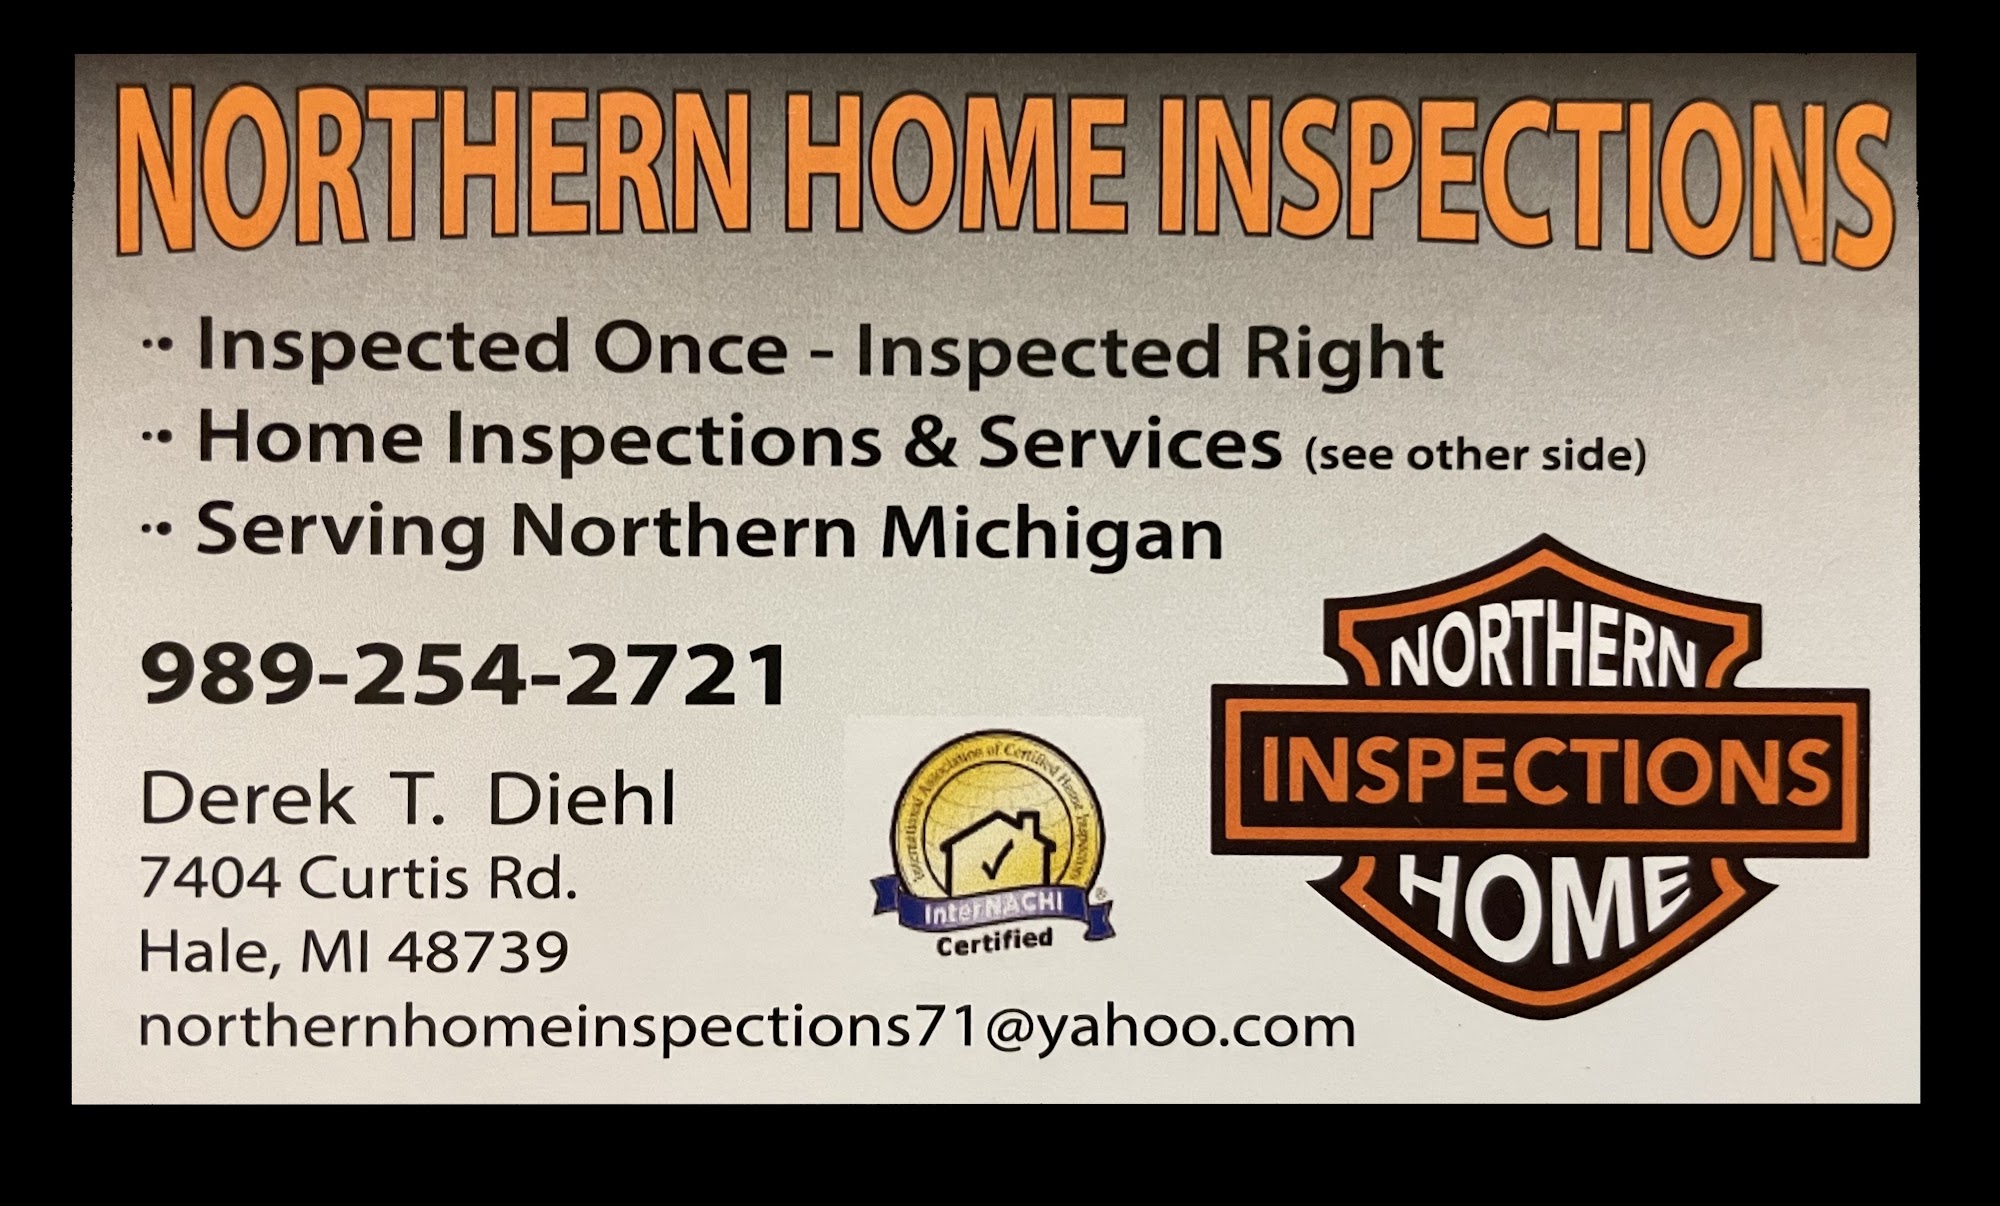 Northern Home Inspections 7404 Curtis Rd, Hale Michigan 48739